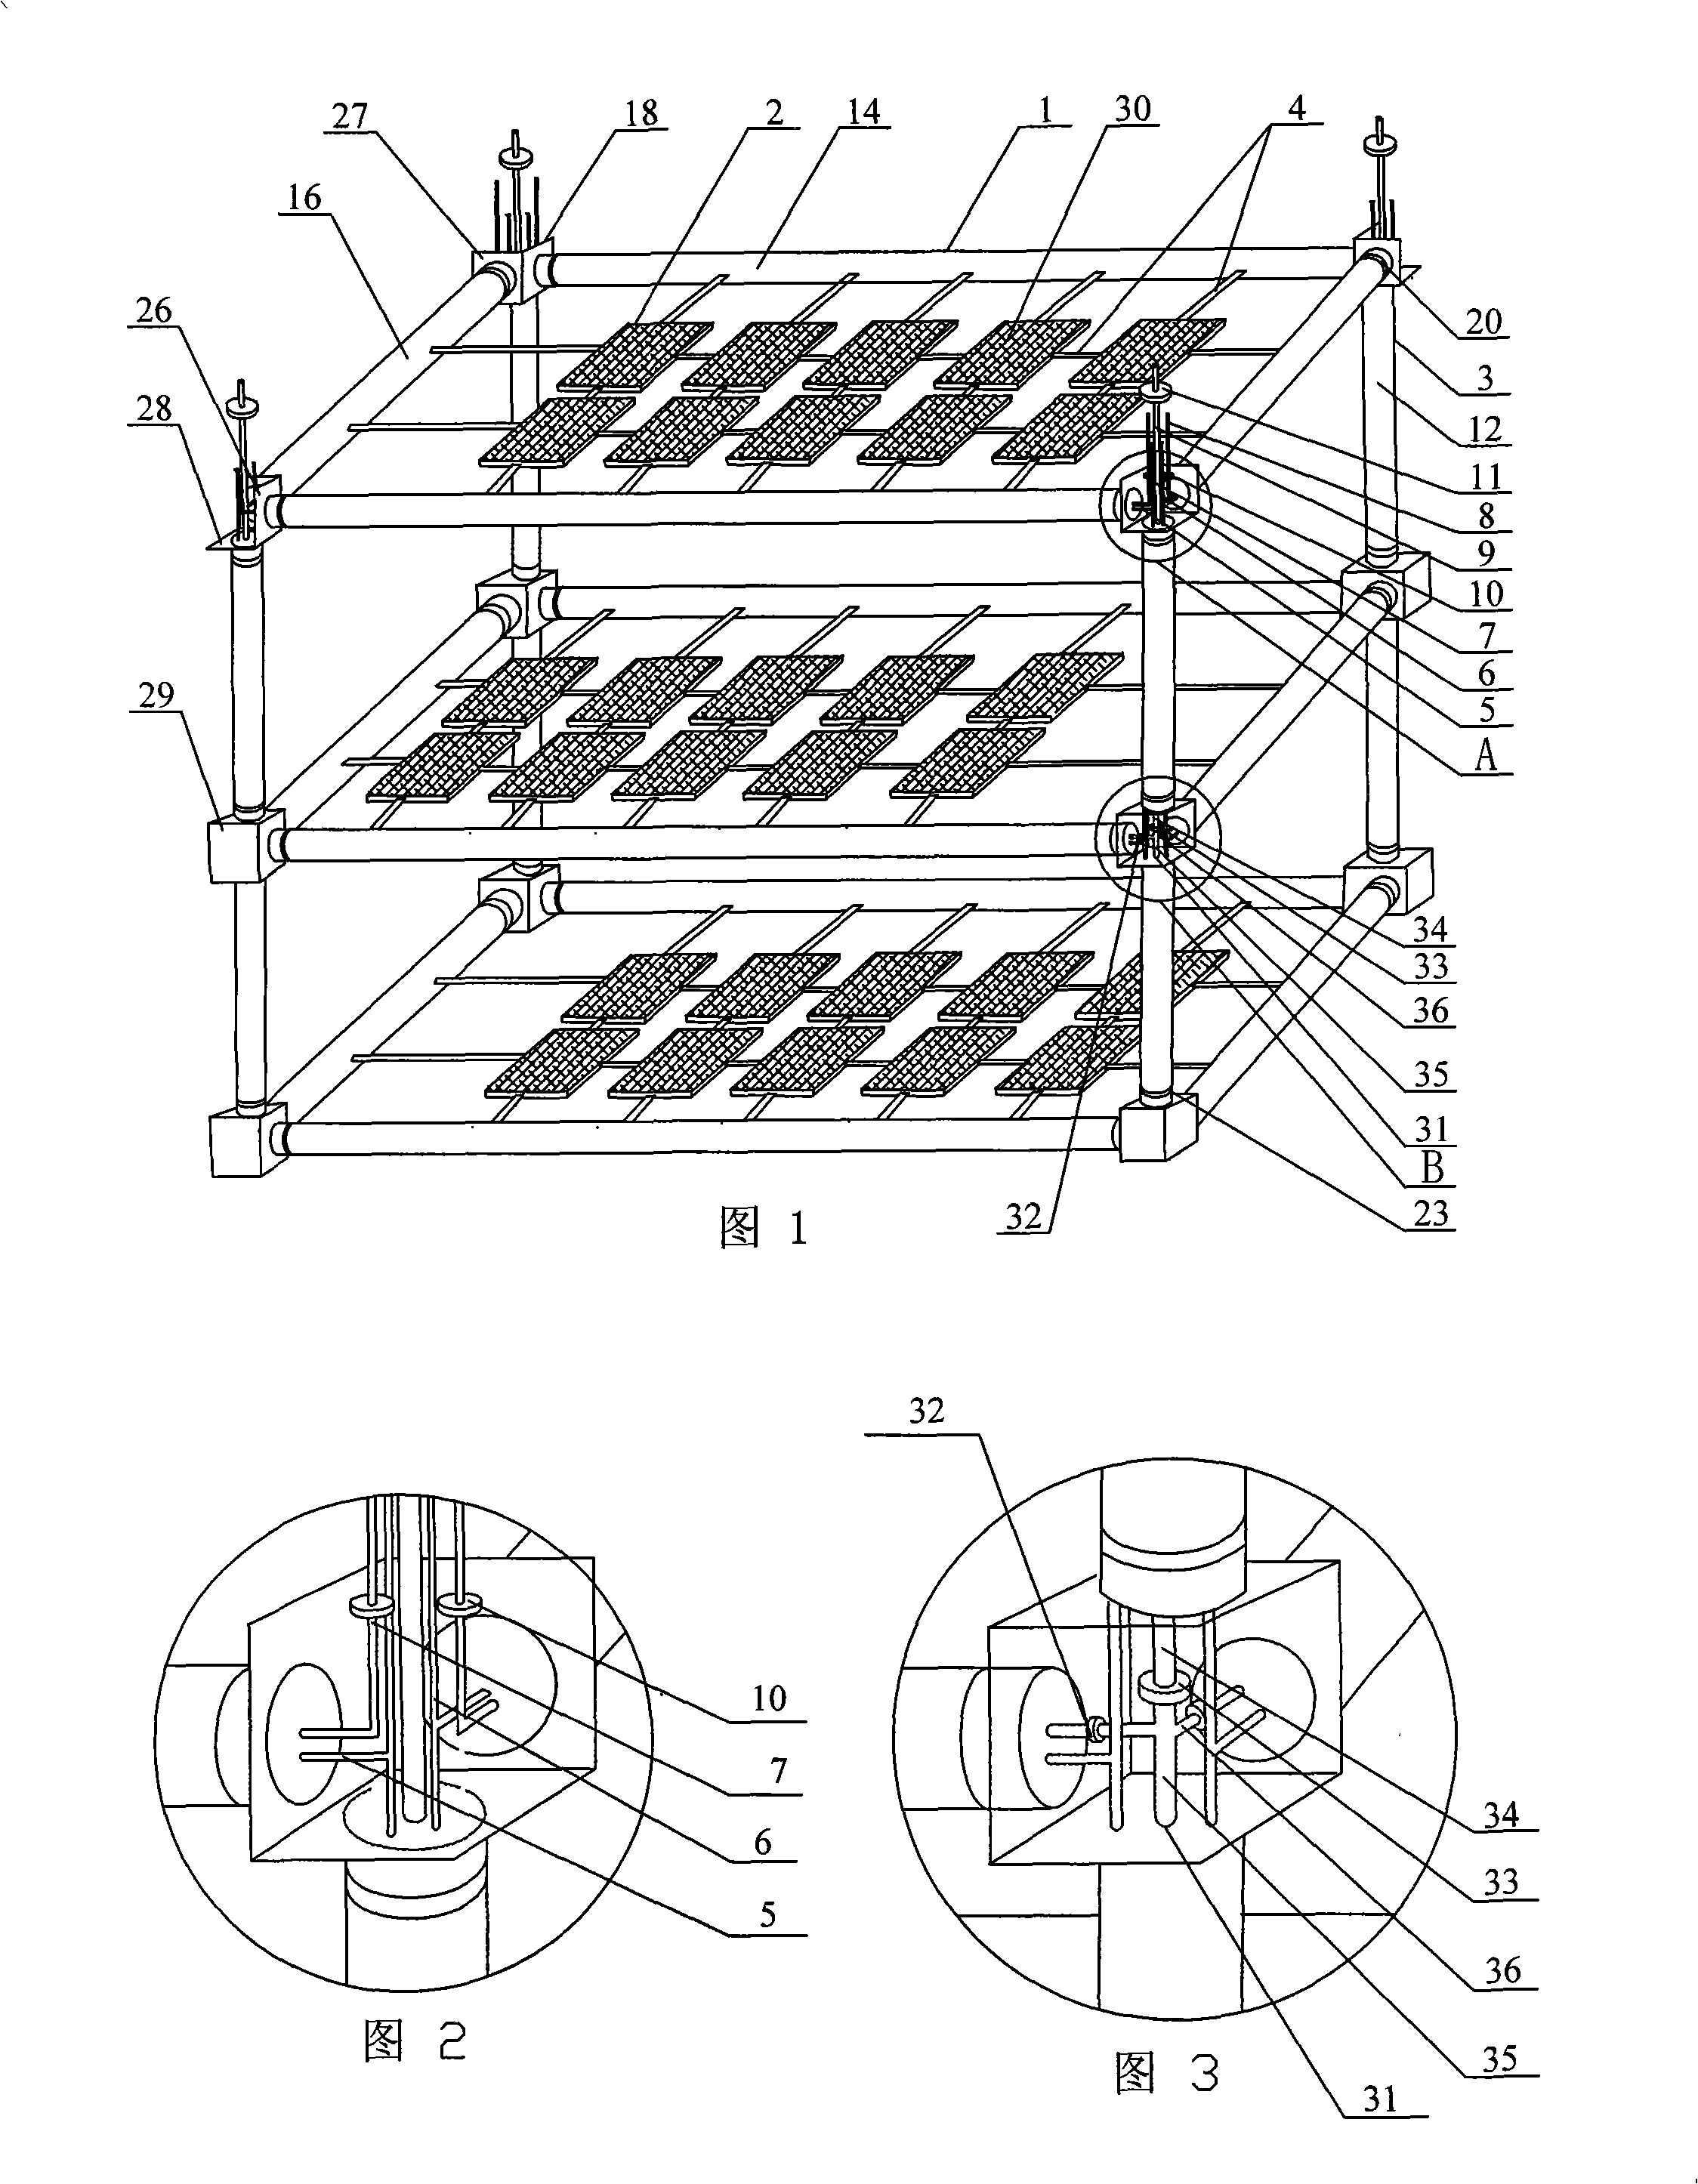 Space fragment and micrometeoroid impact resistant protection mechanism capable of inflating and expanding on rails